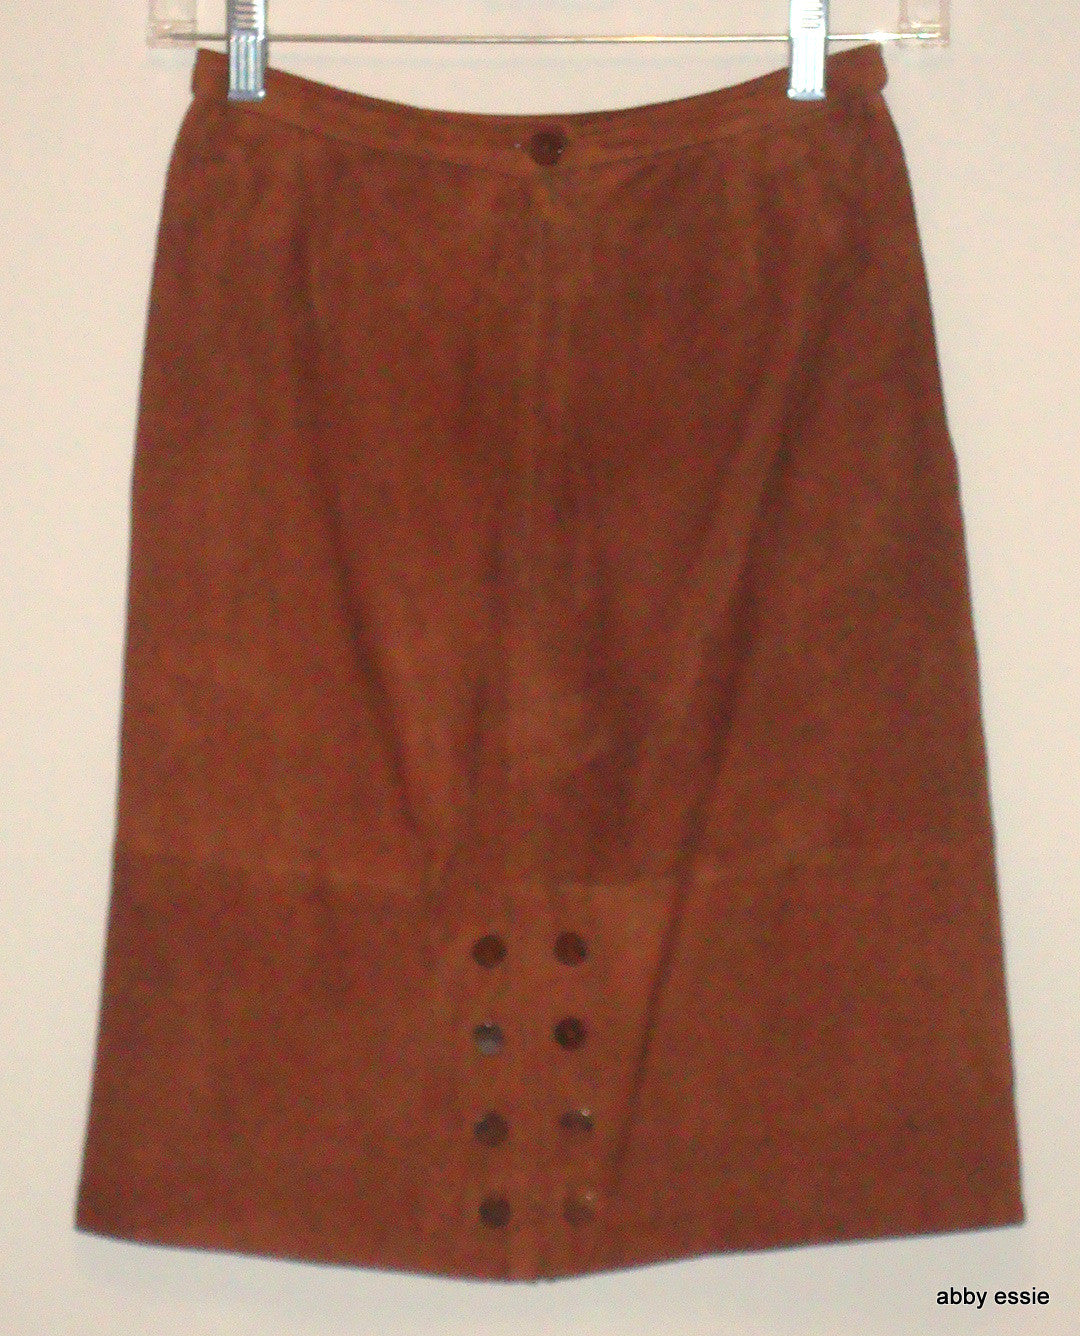 Vintage Valentino Made In Italy Brown Suede Leather Skirt Abby Essie